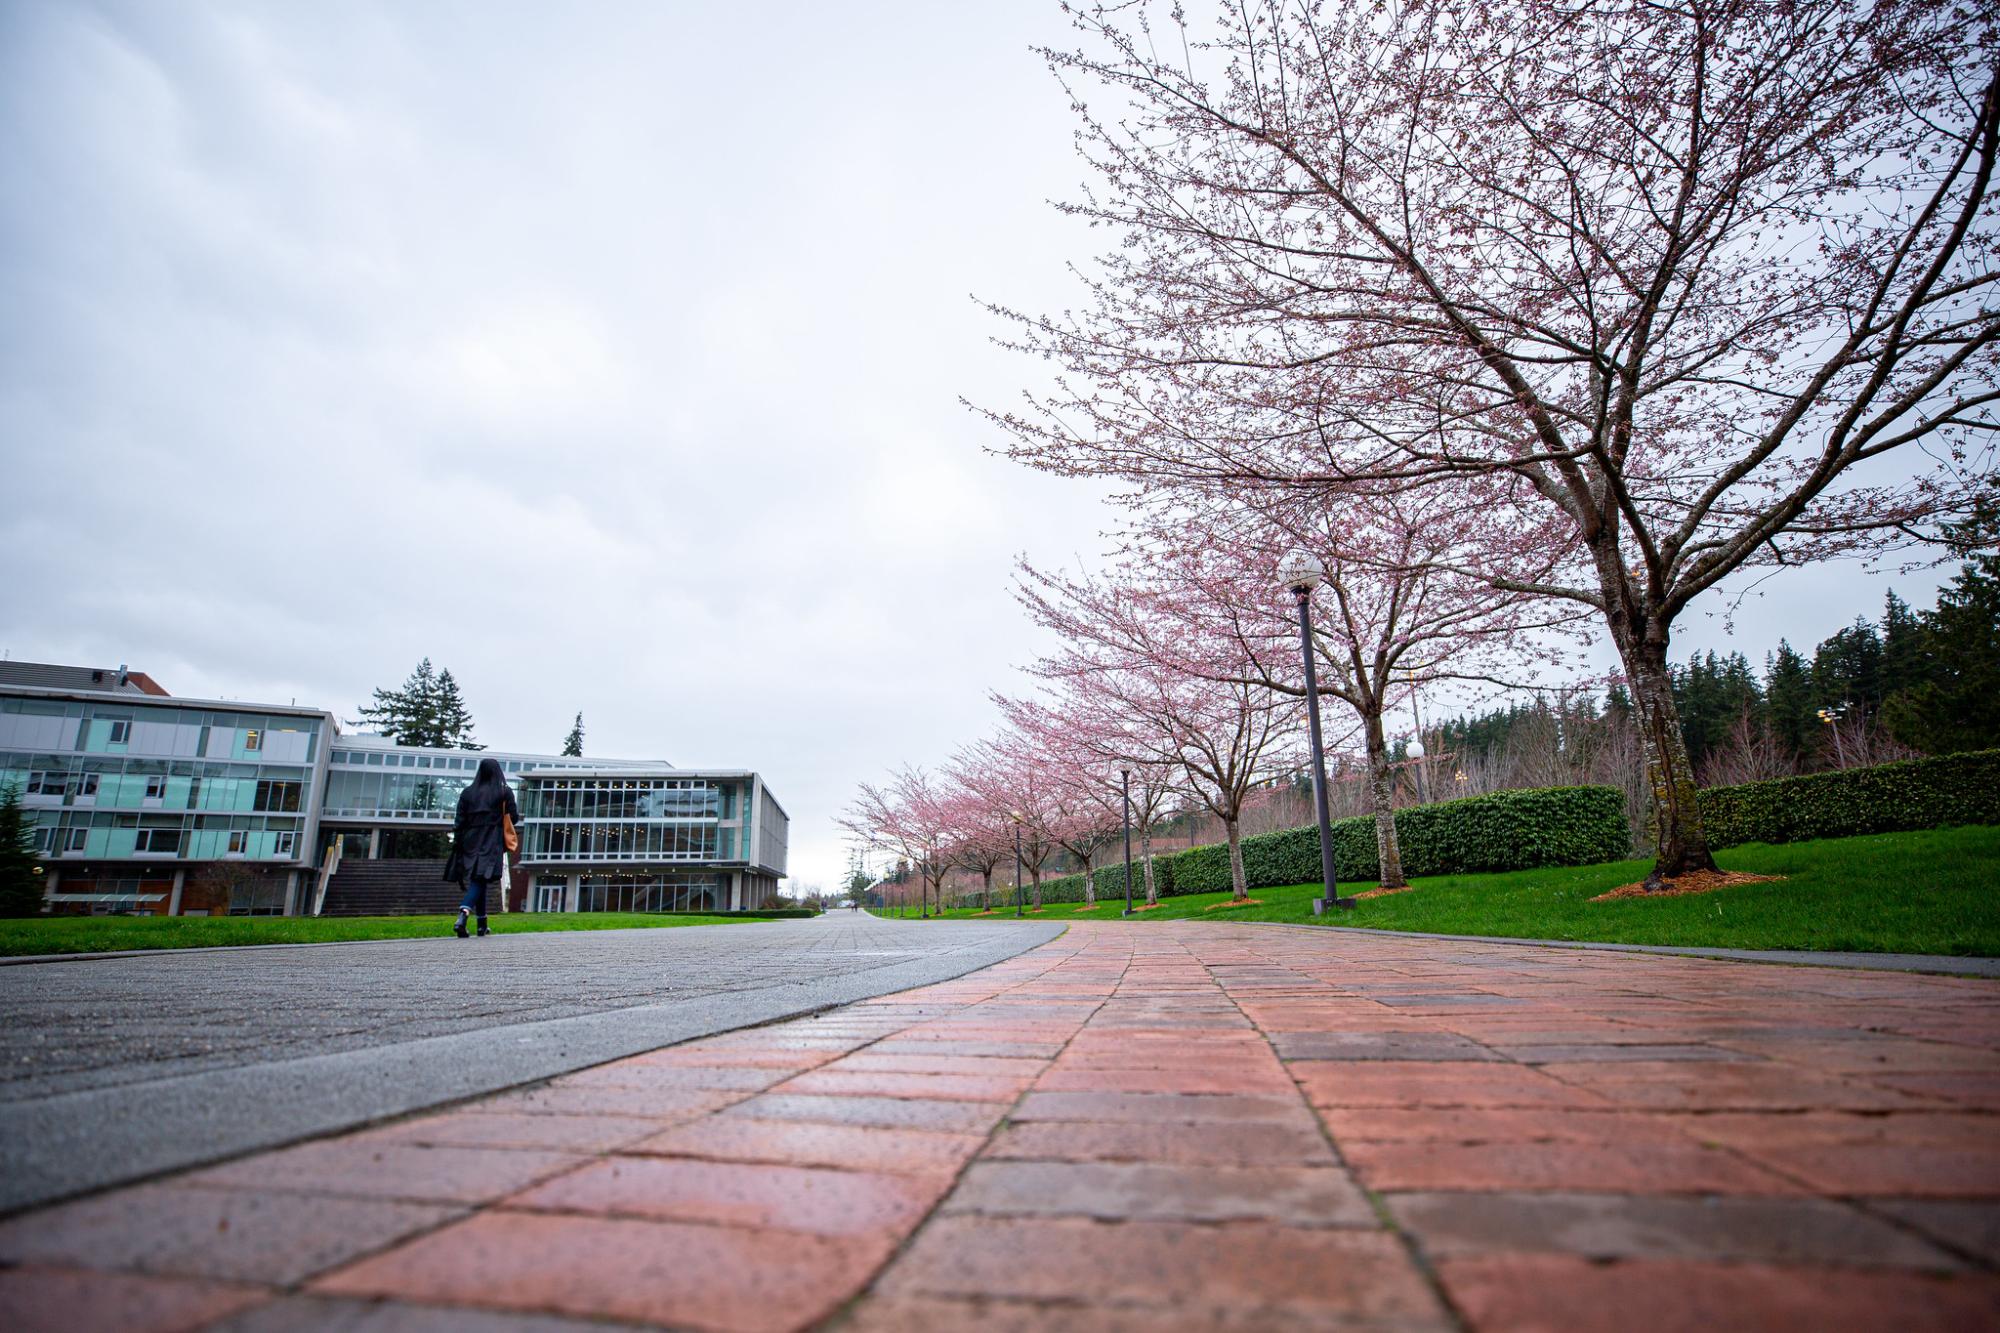 Cherry blossoms in bloom on campus